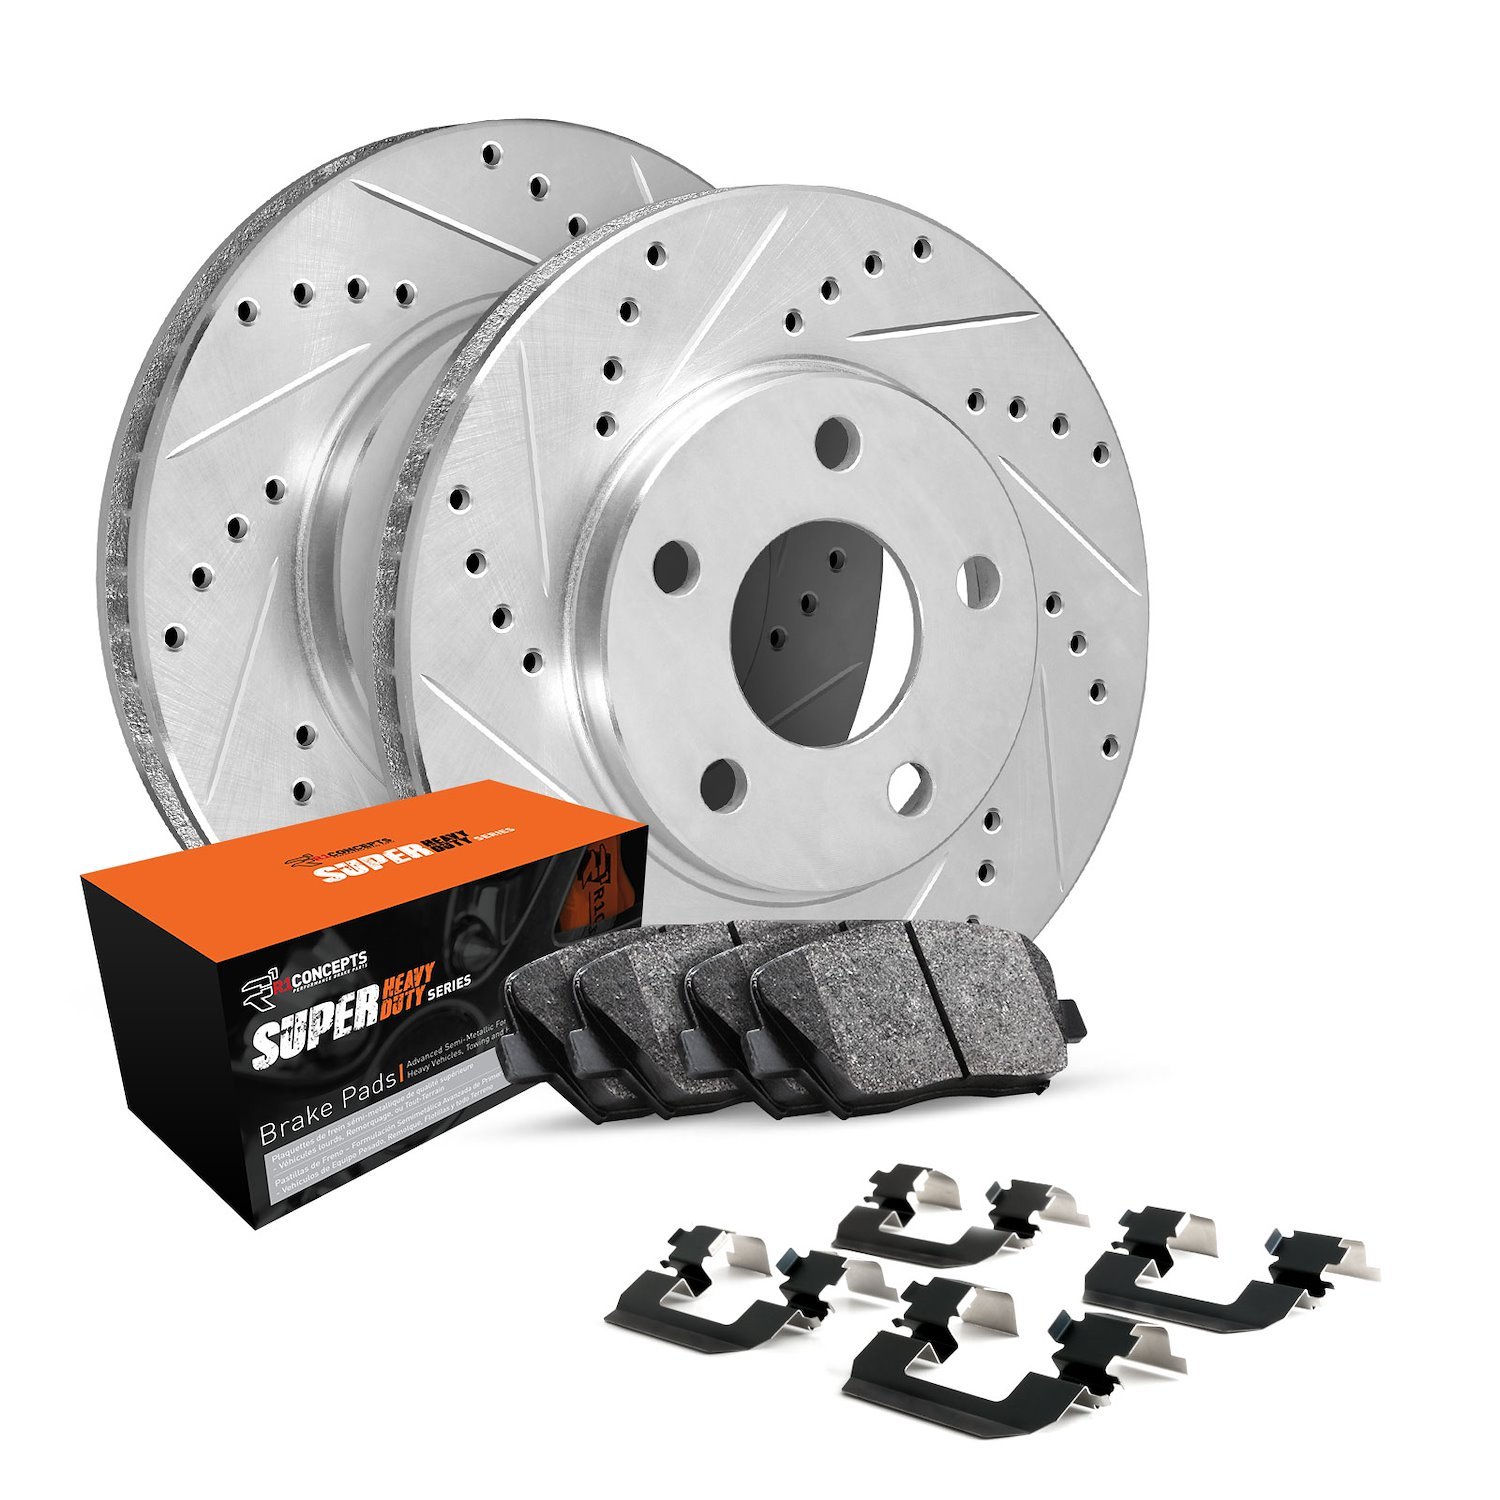 E-Line Drilled & Slotted Silver Brake Rotor Set w/Super-Duty Pads & Hardware, 1971-1991 Fits Multiple Makes/Models